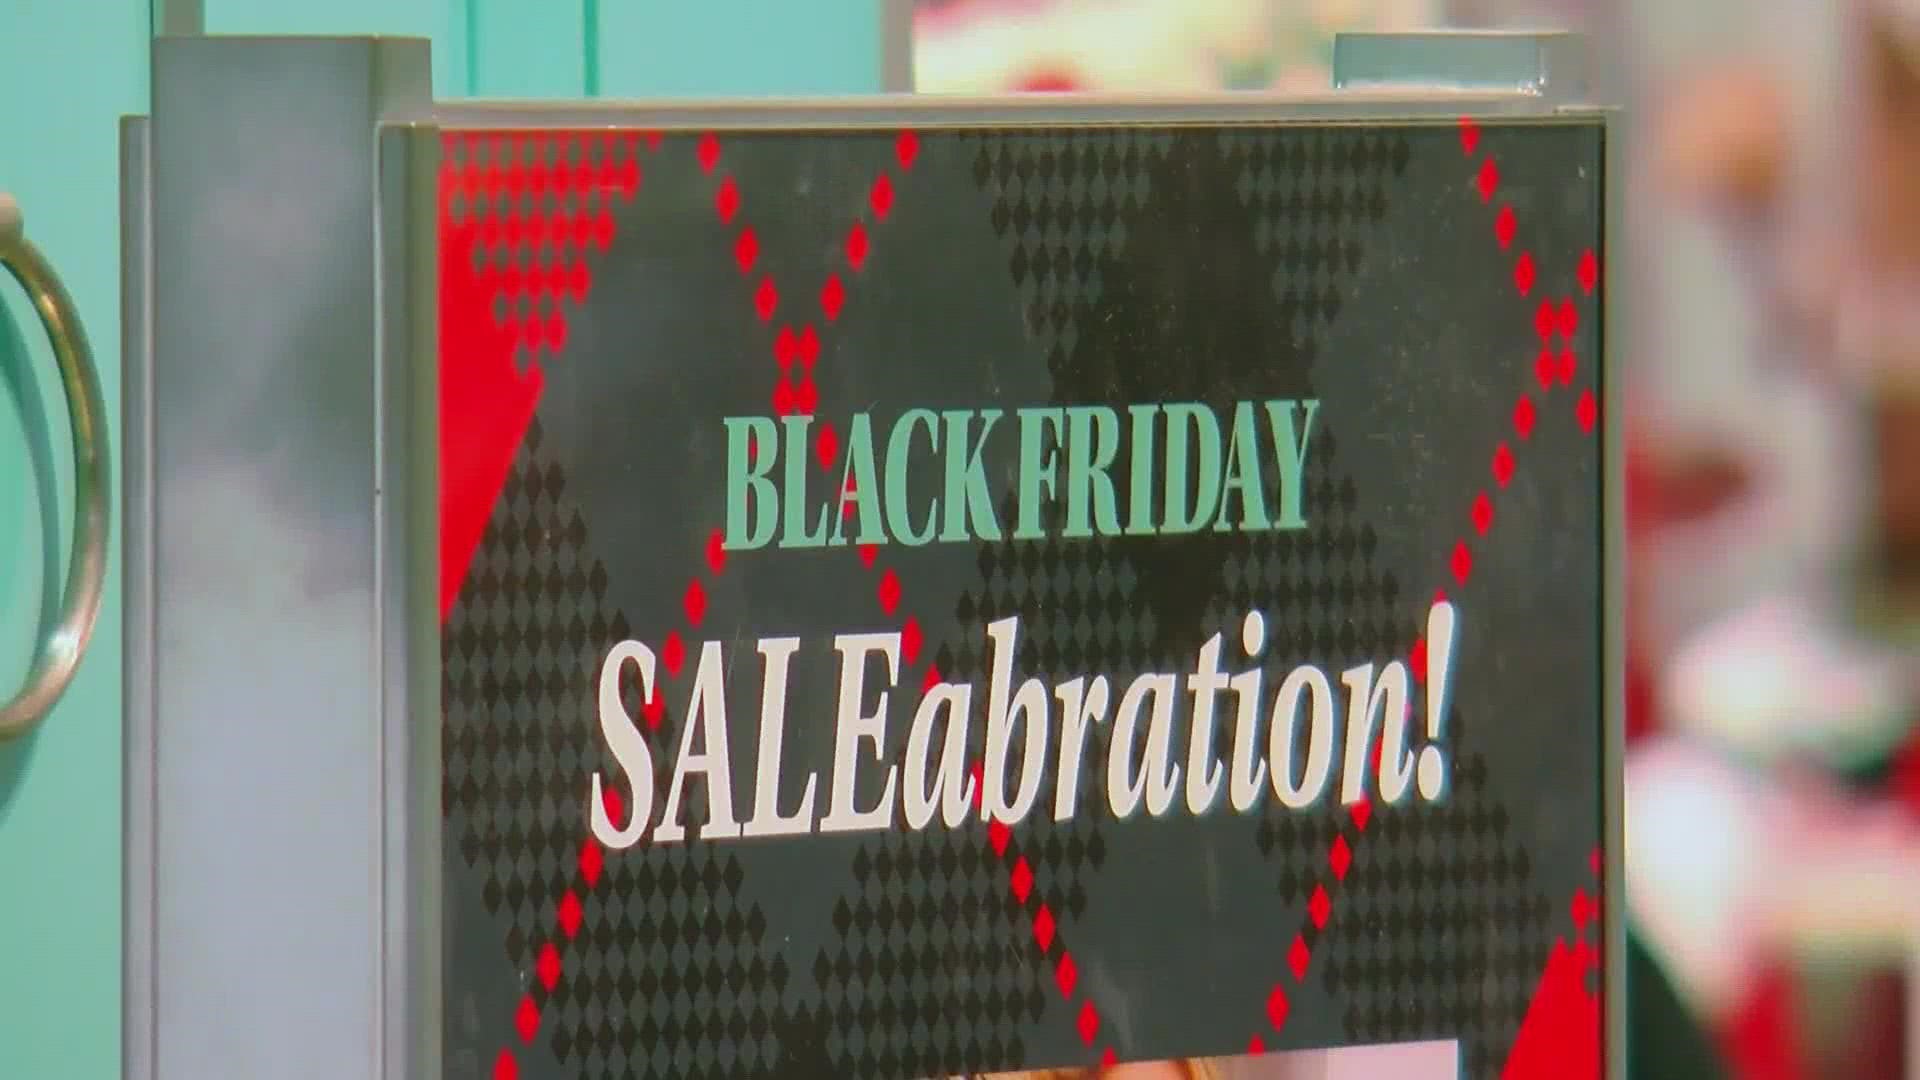 Black Friday is right around the corner, but before you start scooping up anything on sale, you need a plan to help you save money.